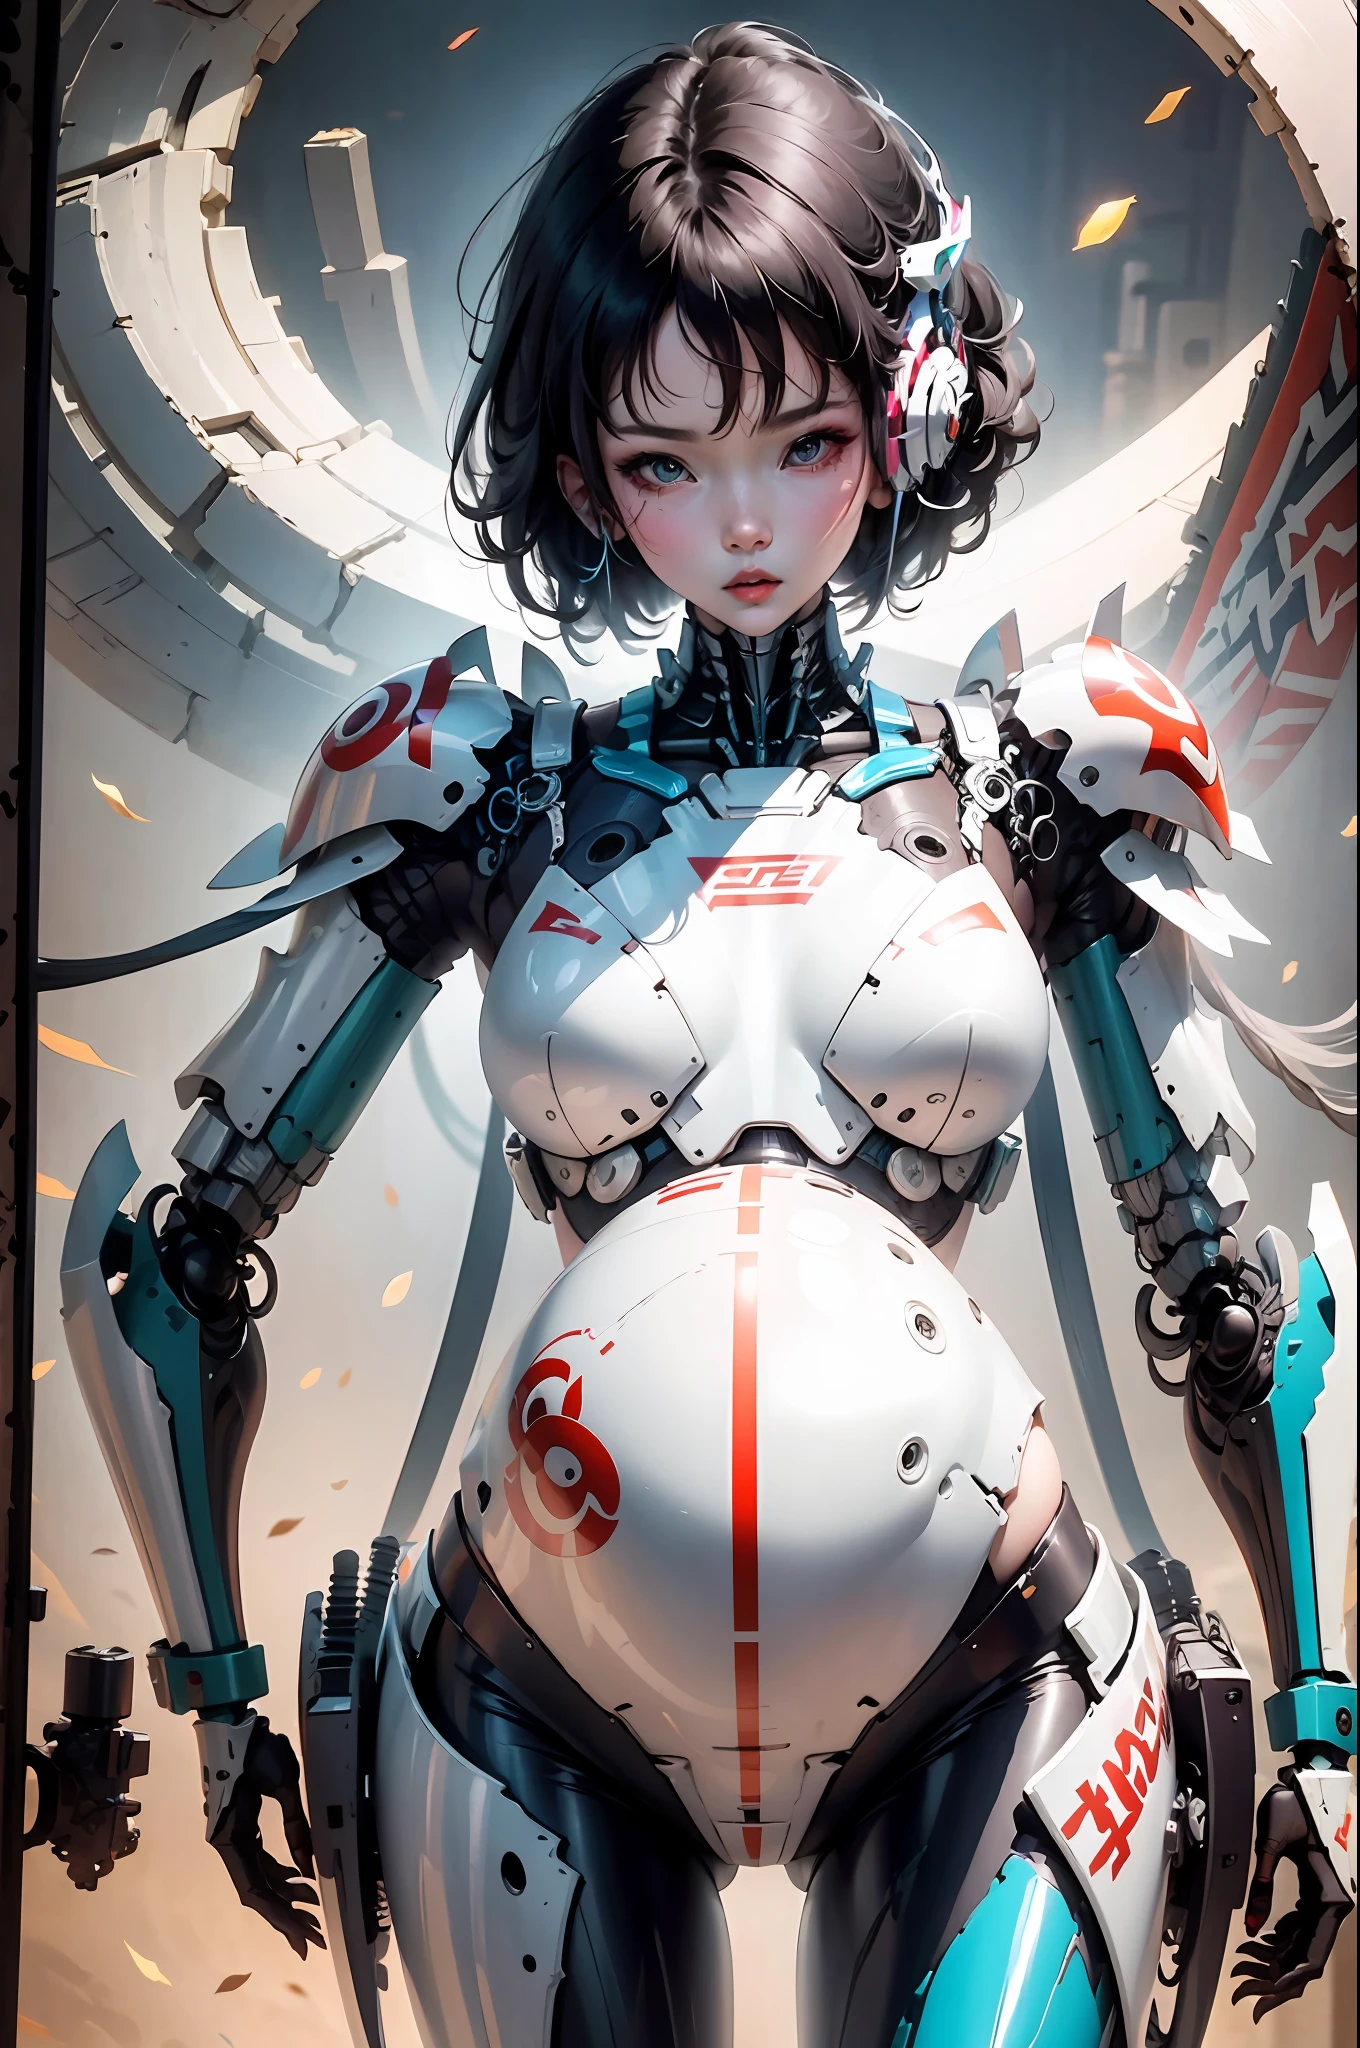 (Very detailed: 1.5) Futuristic mecha girl on neon flashing sci-fi magazine cover, (Cyberpunk: 1.3) style, wearing stylish combat suit with glowing accents, confidently posing as a giant robot in the background, (bold typography: 1.2), dynamic composition, bright colors, (Akira style: 1.1), (Hajime Sorayama inspiration: 1.2), pregnant, pregnant belly